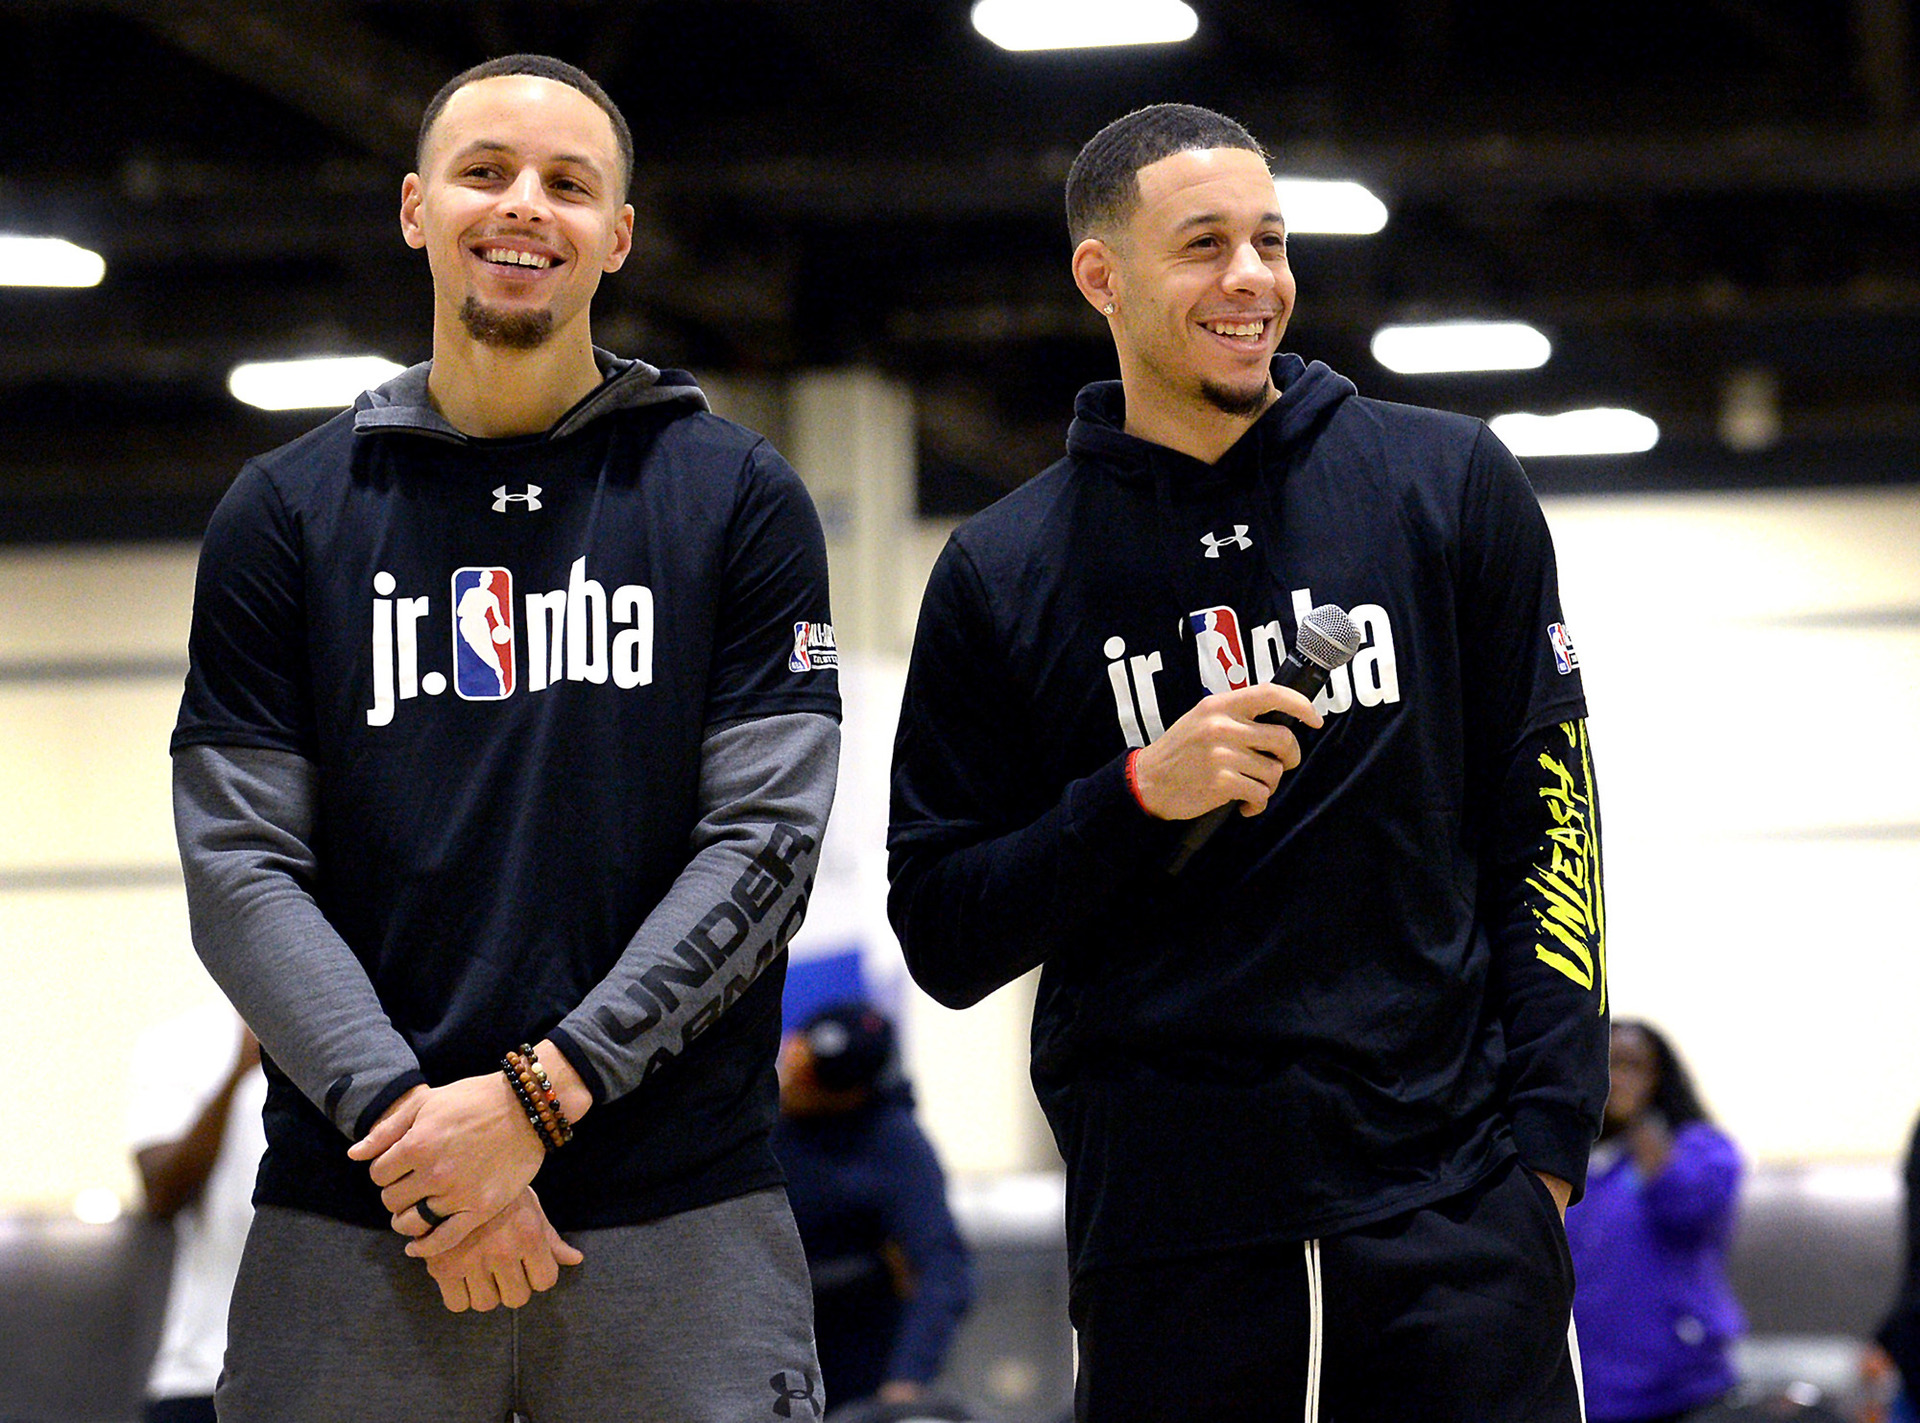 Who is Steph Curry's brother, Seth Curry? Have they ever played